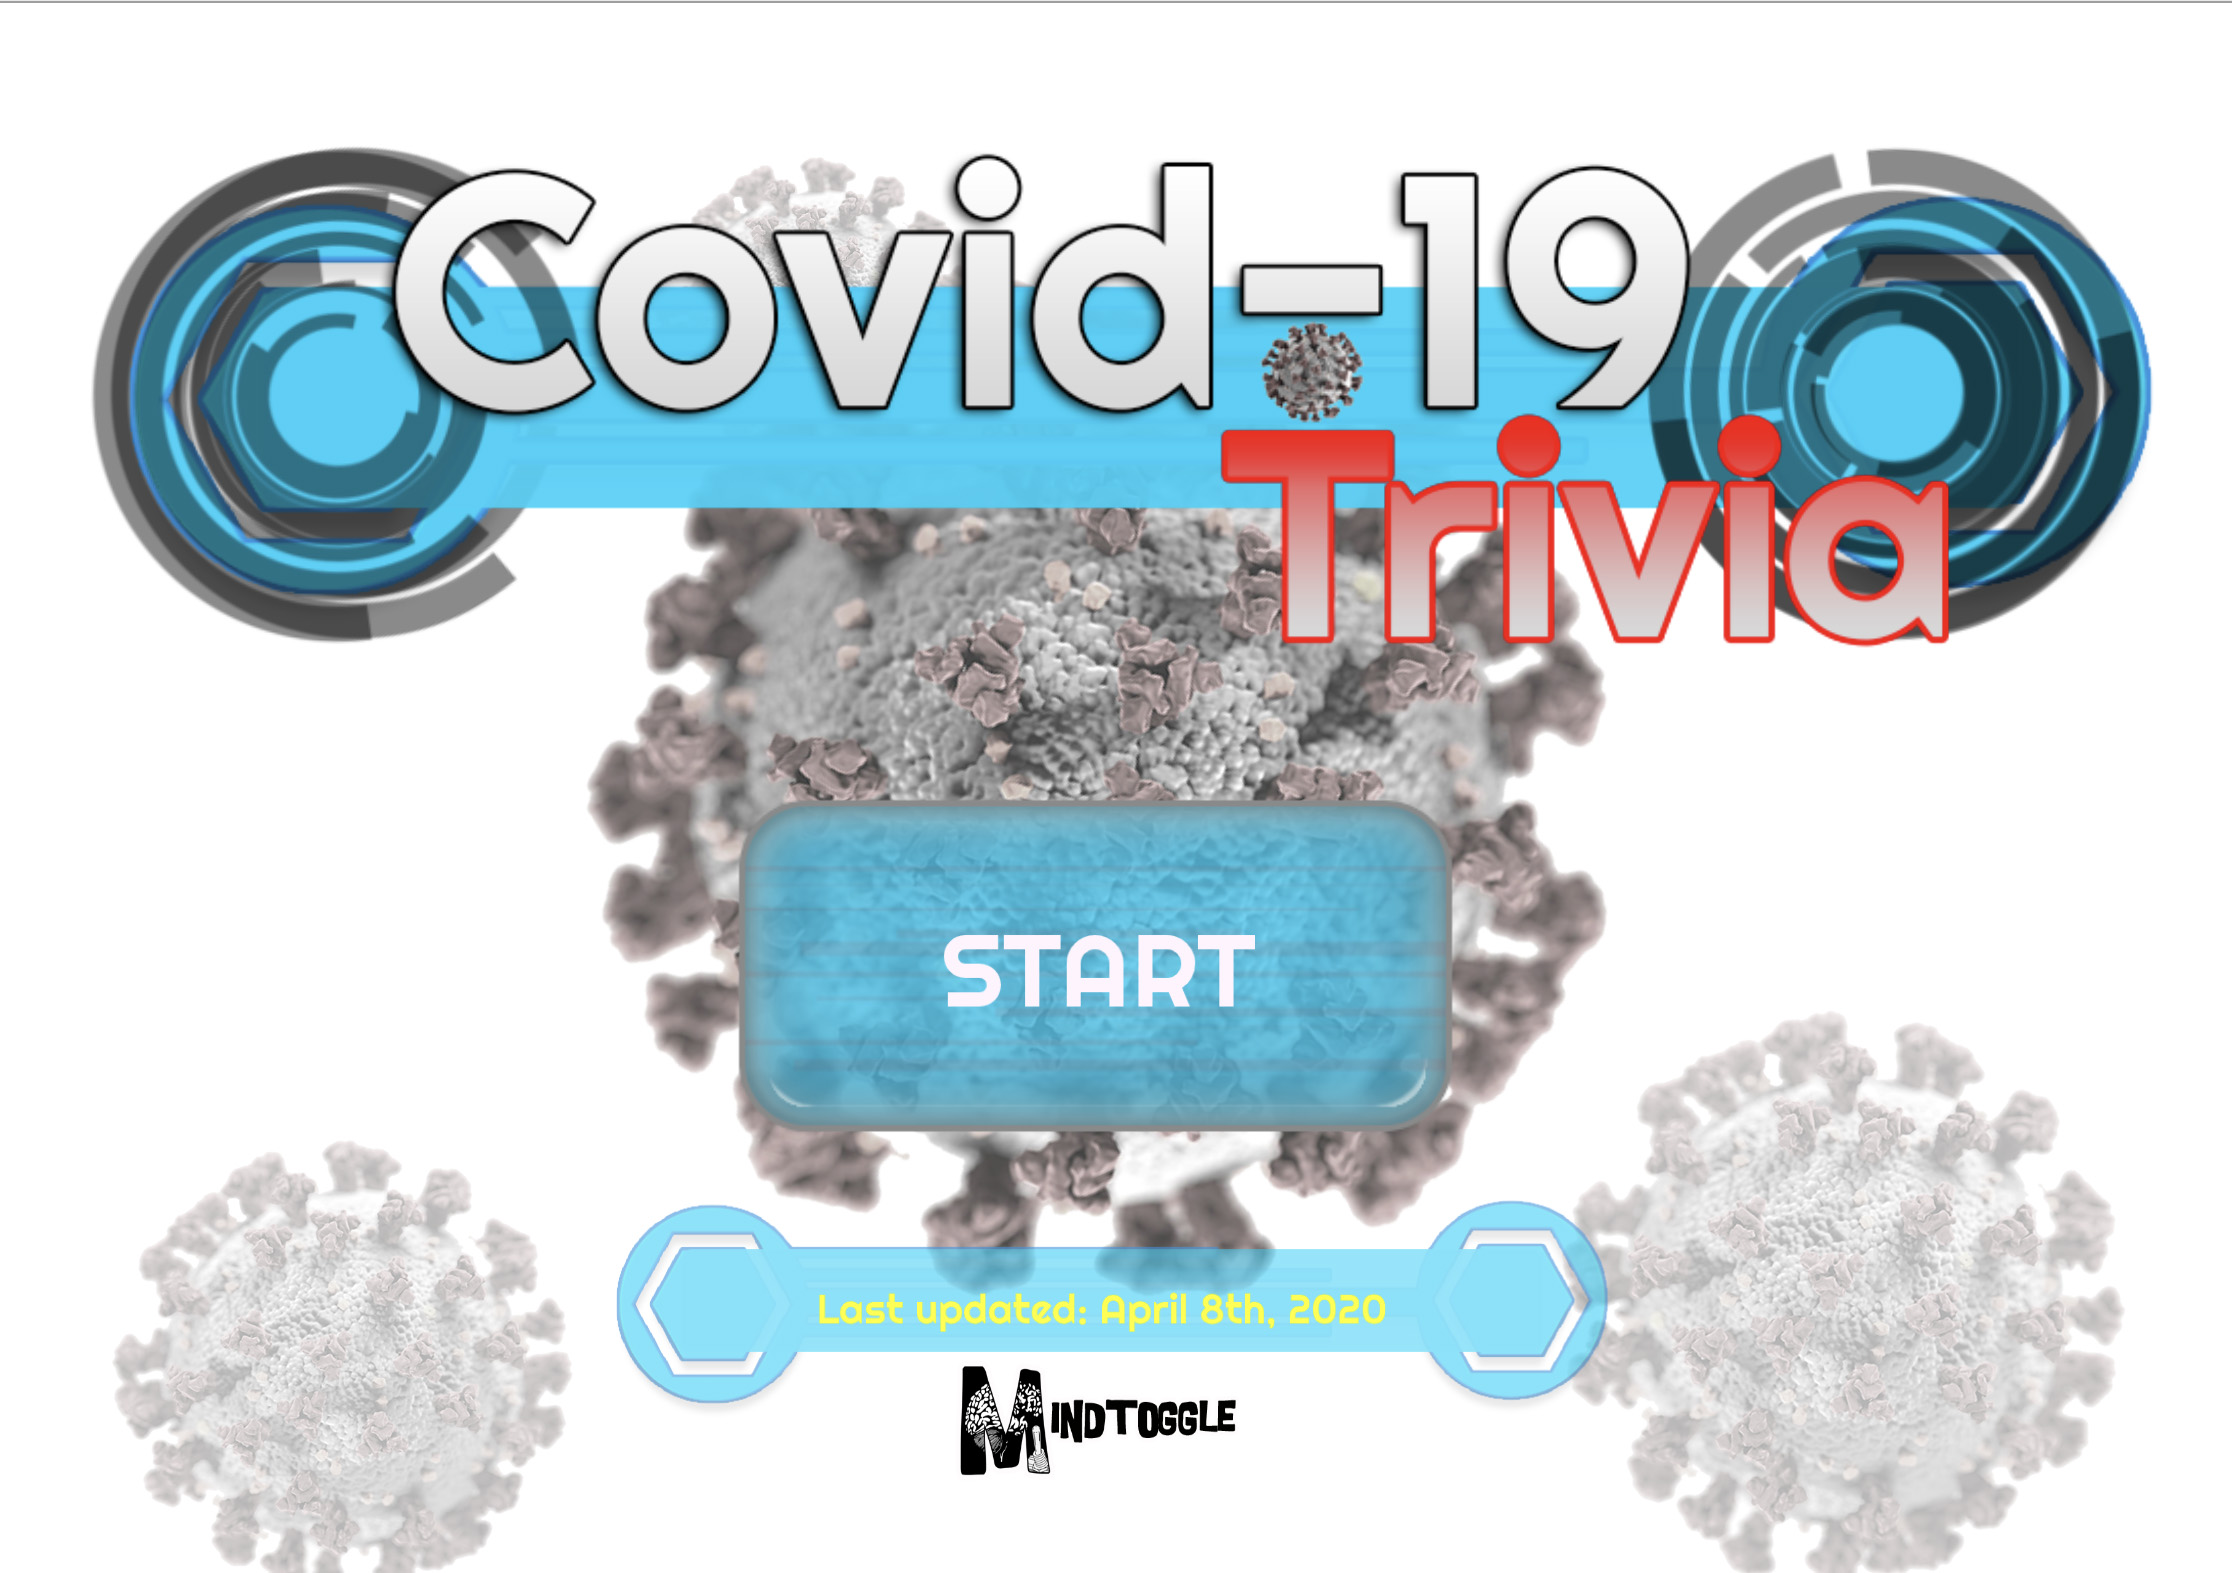 Test you knowledge on the Covid-19 facts 